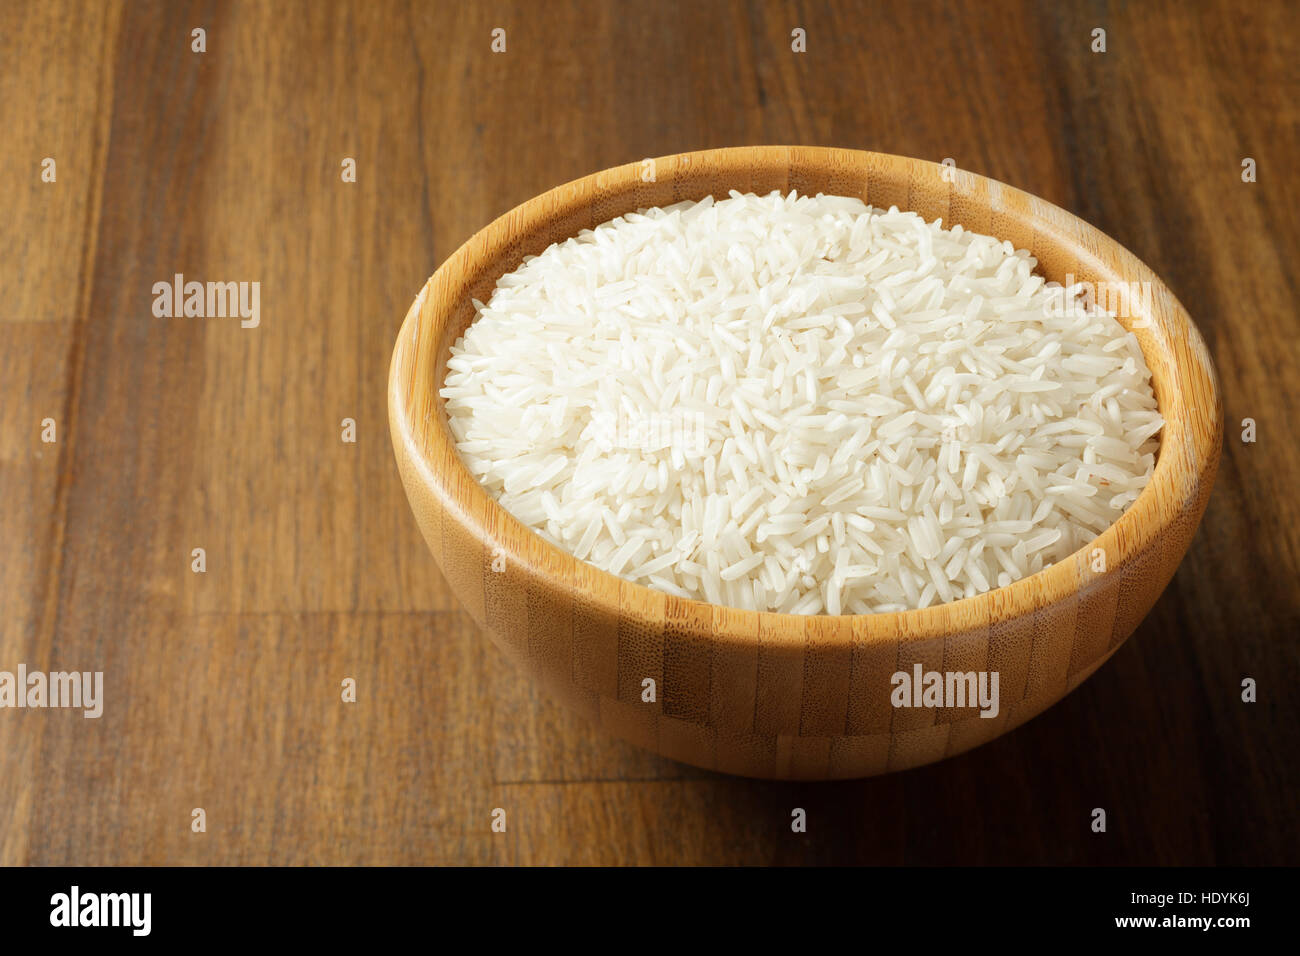 White rice in a wooden bowl Stock Photo